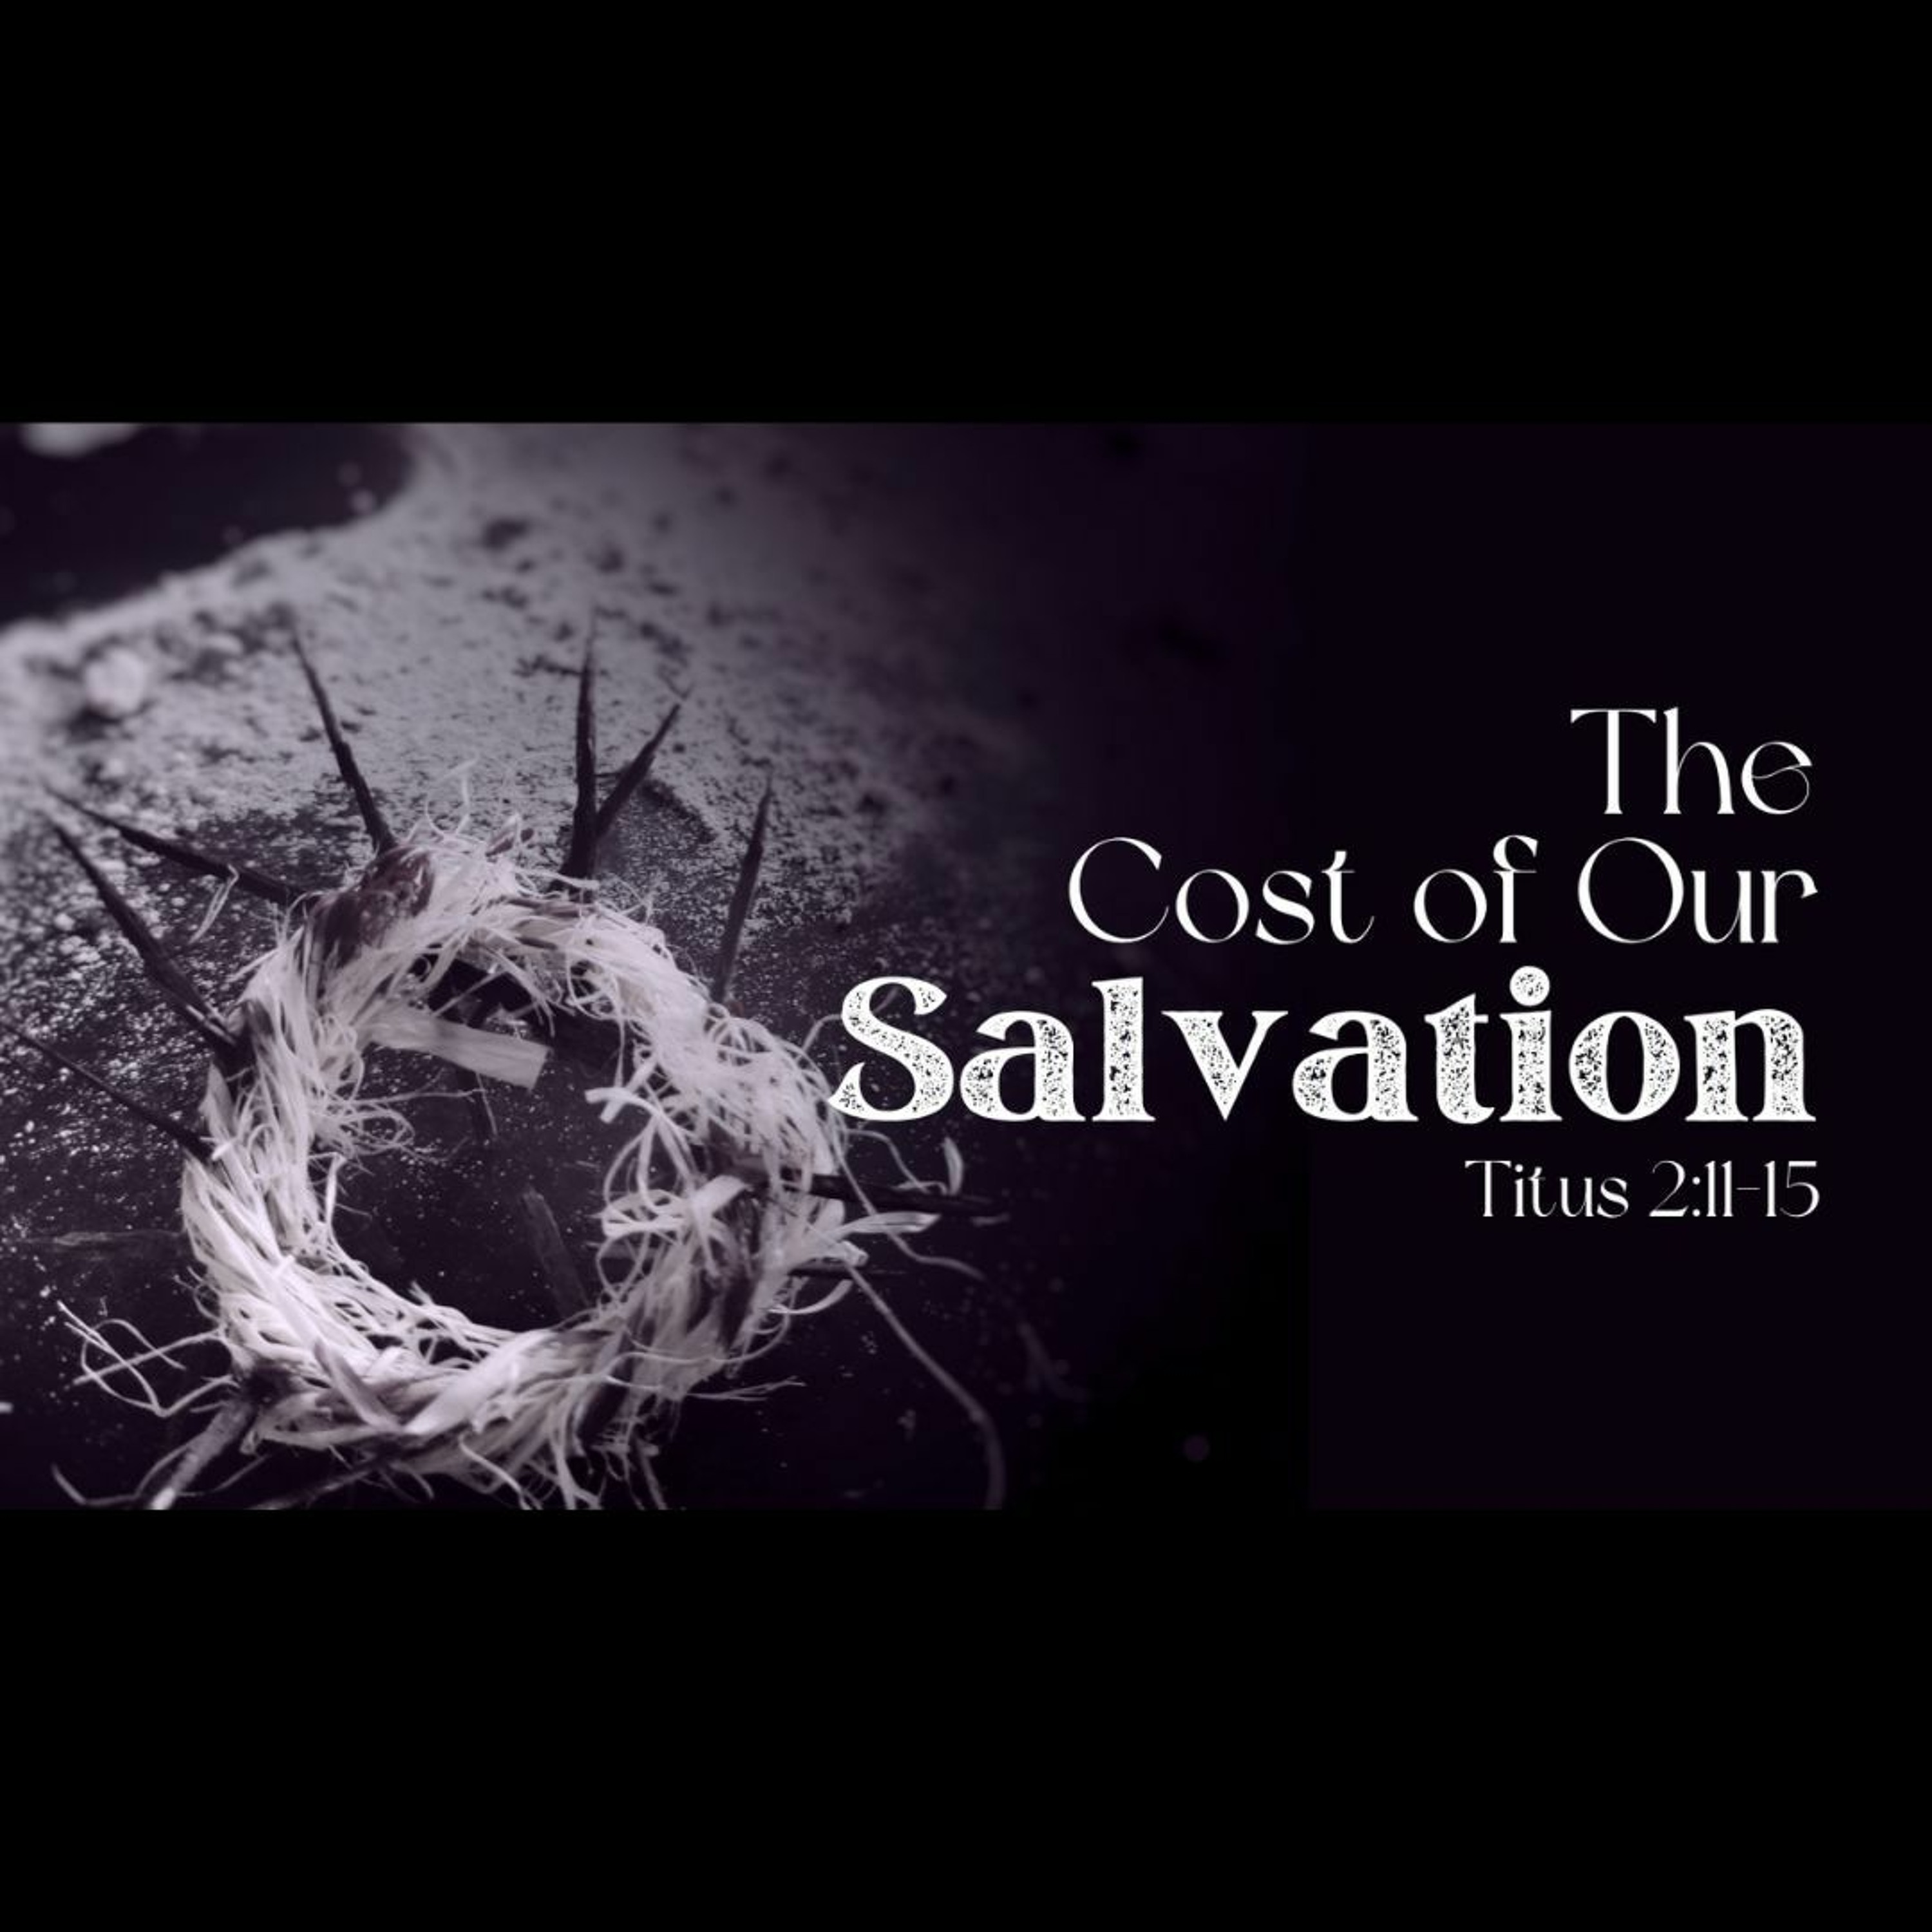 The Cost of Our Salvation